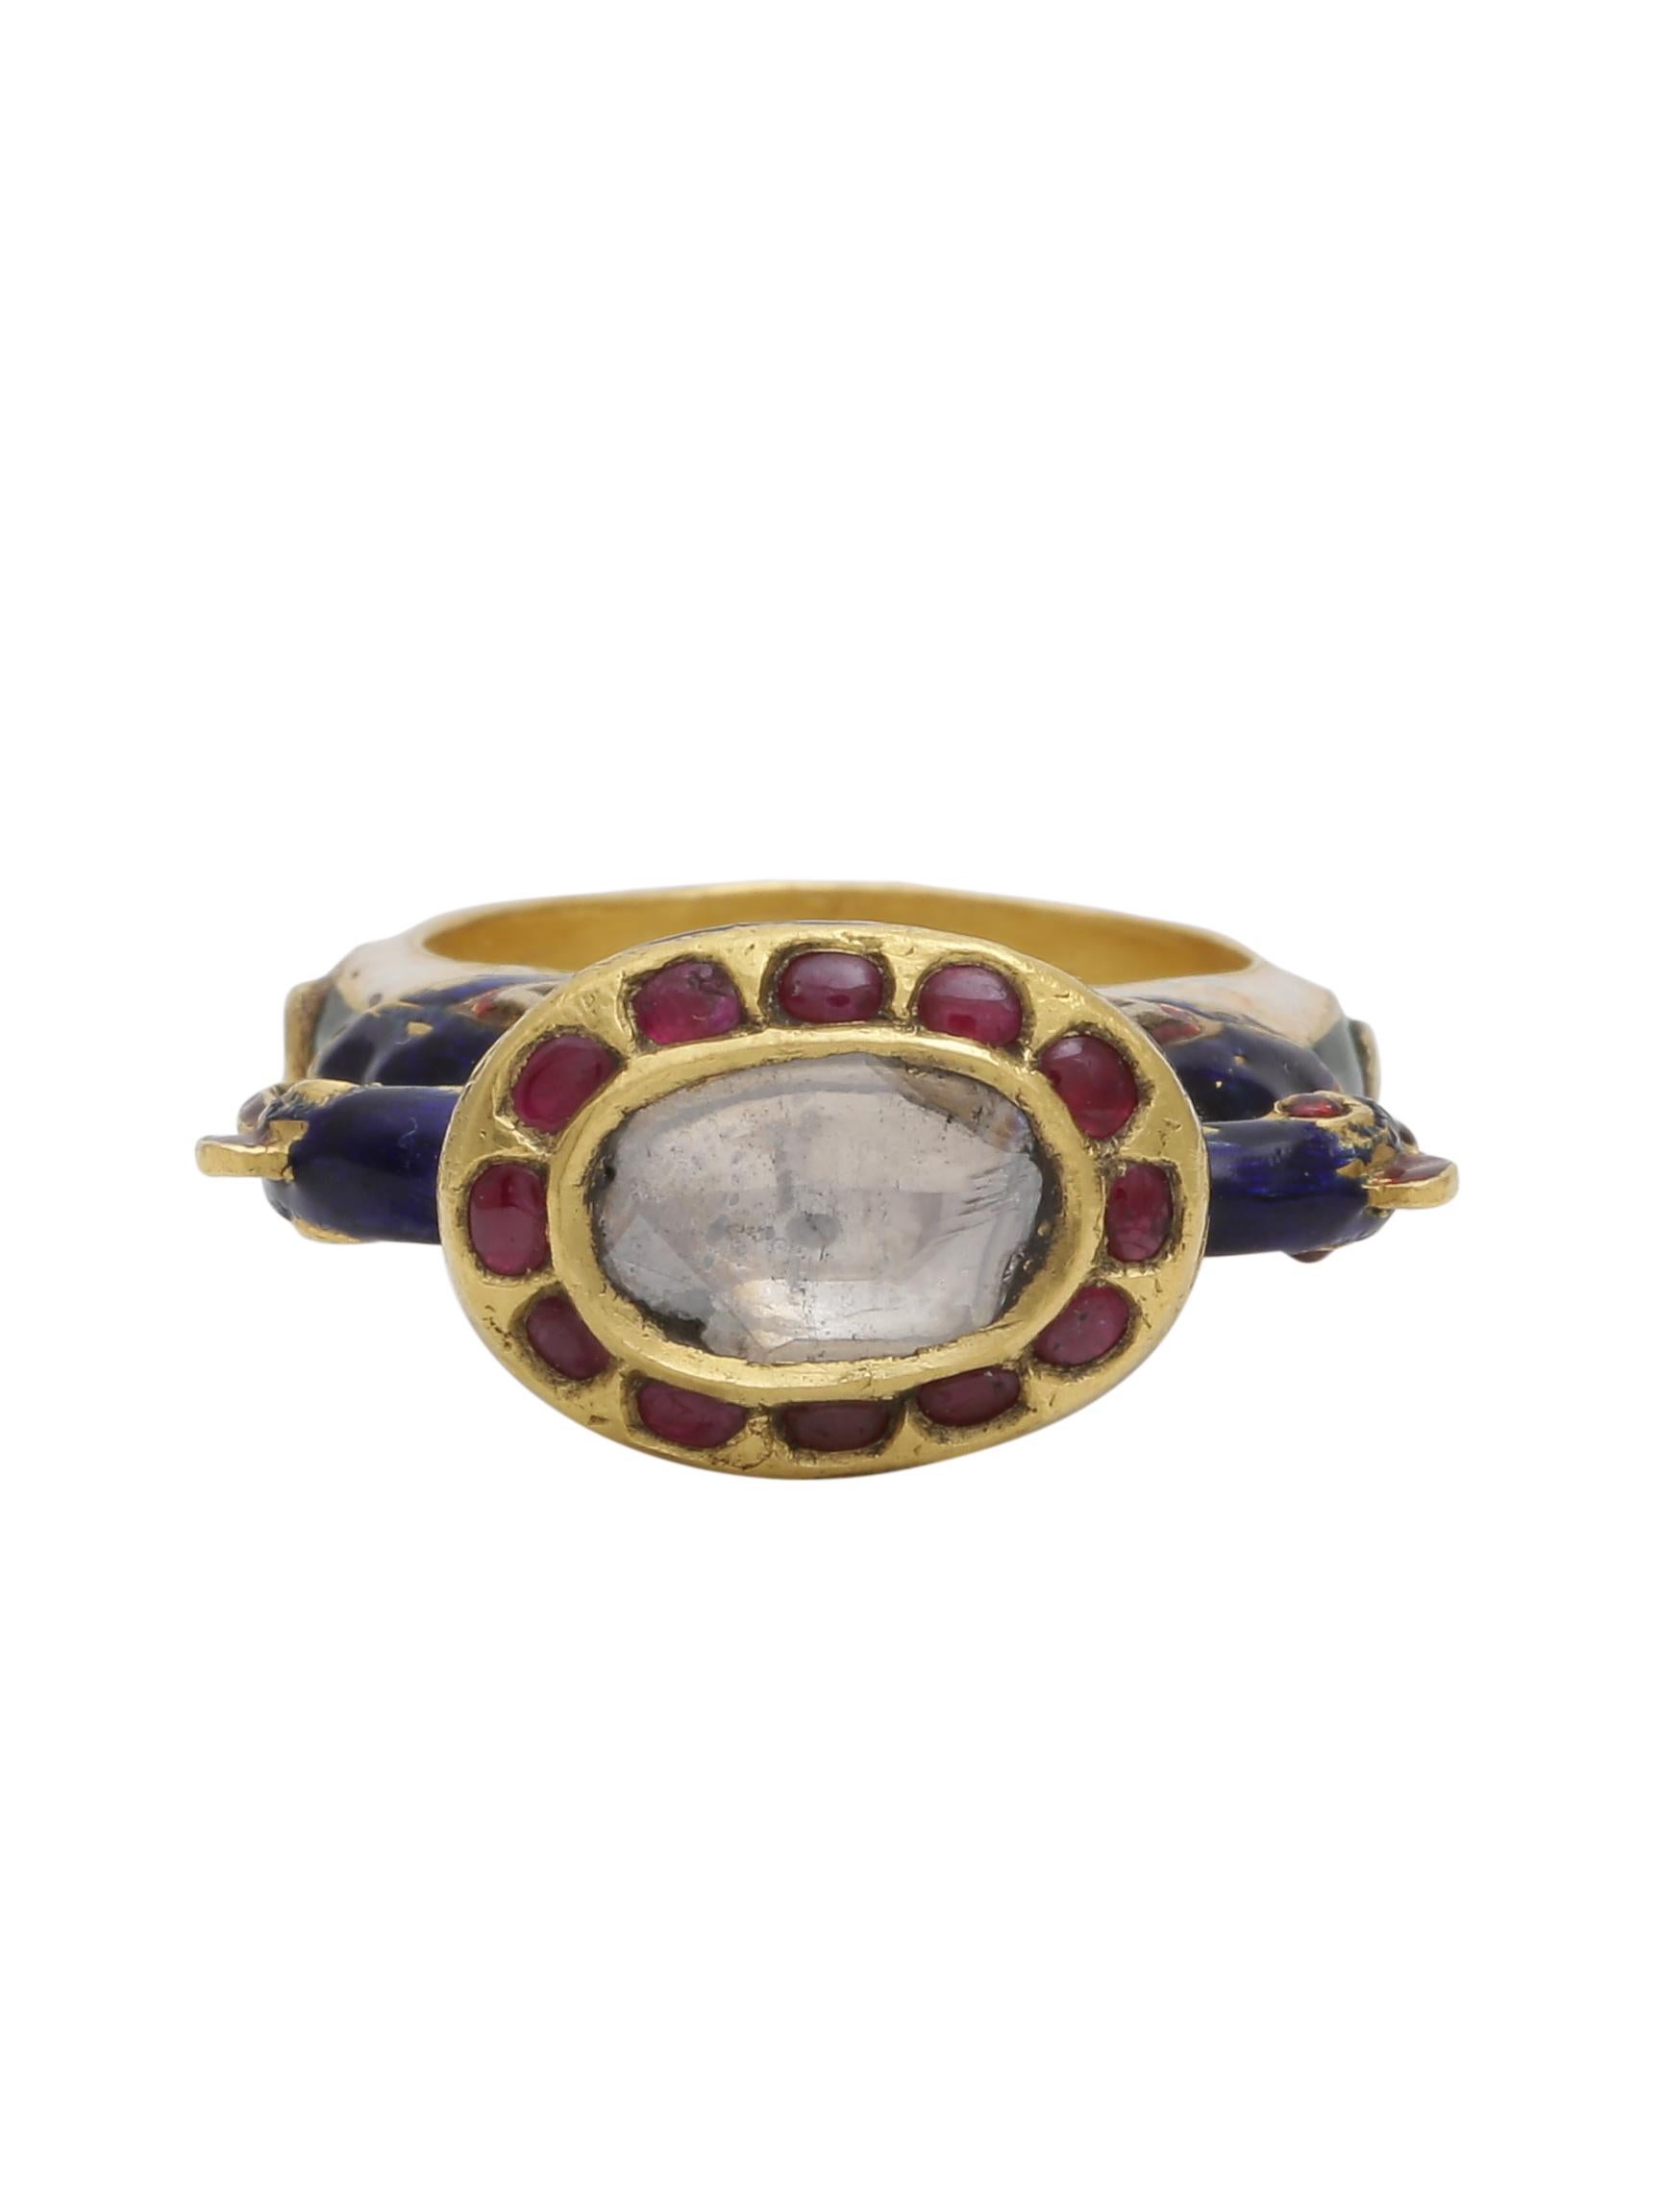 Statement Peacock Ring with Diamond and Enamel Handcrafted in 18 Karat Gold For Sale 1